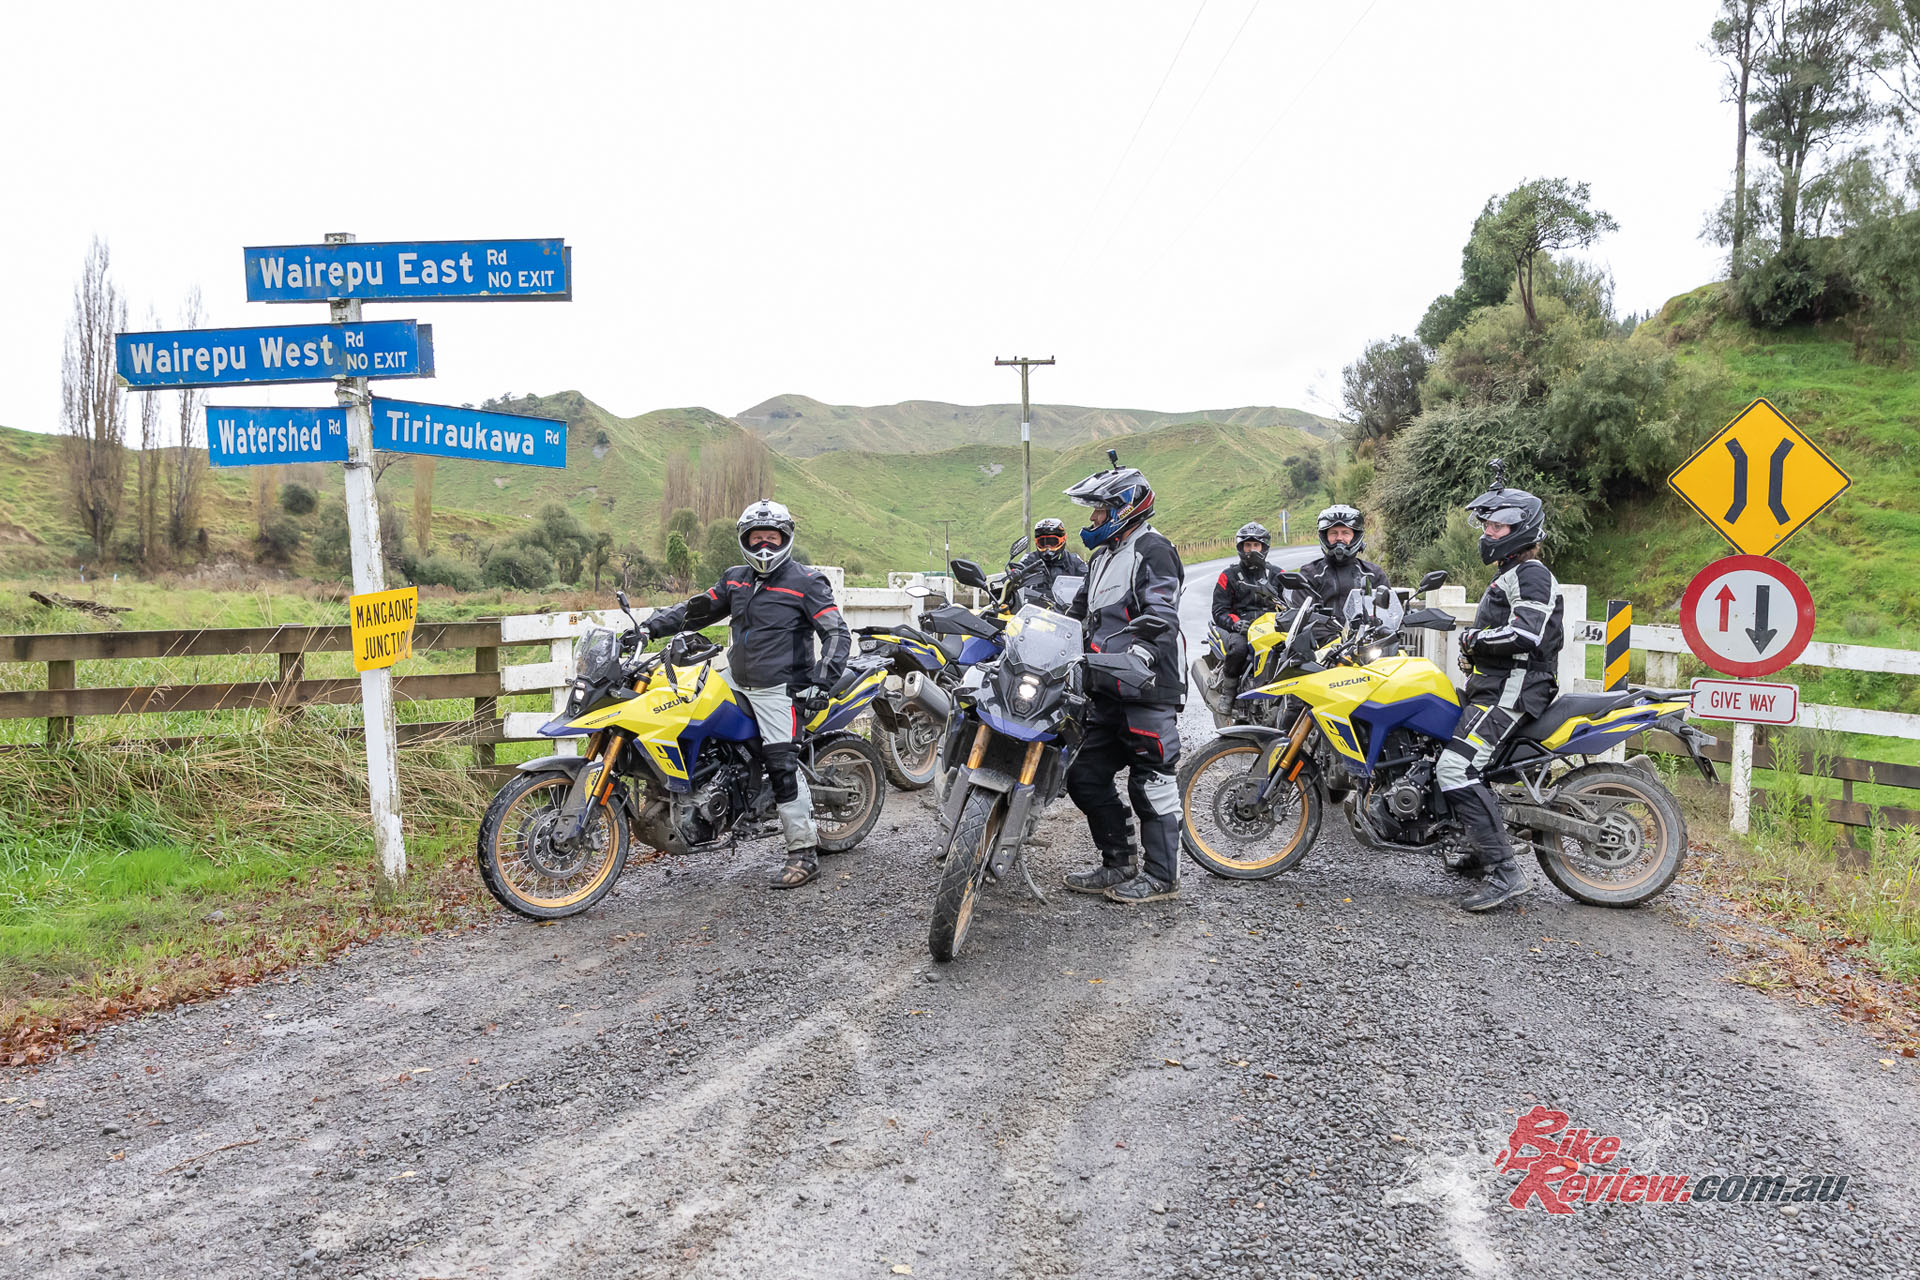 The V-STROM 800DE was up next in New Zealand. The conditions were severely adverse, and the roads were extremely slippery.